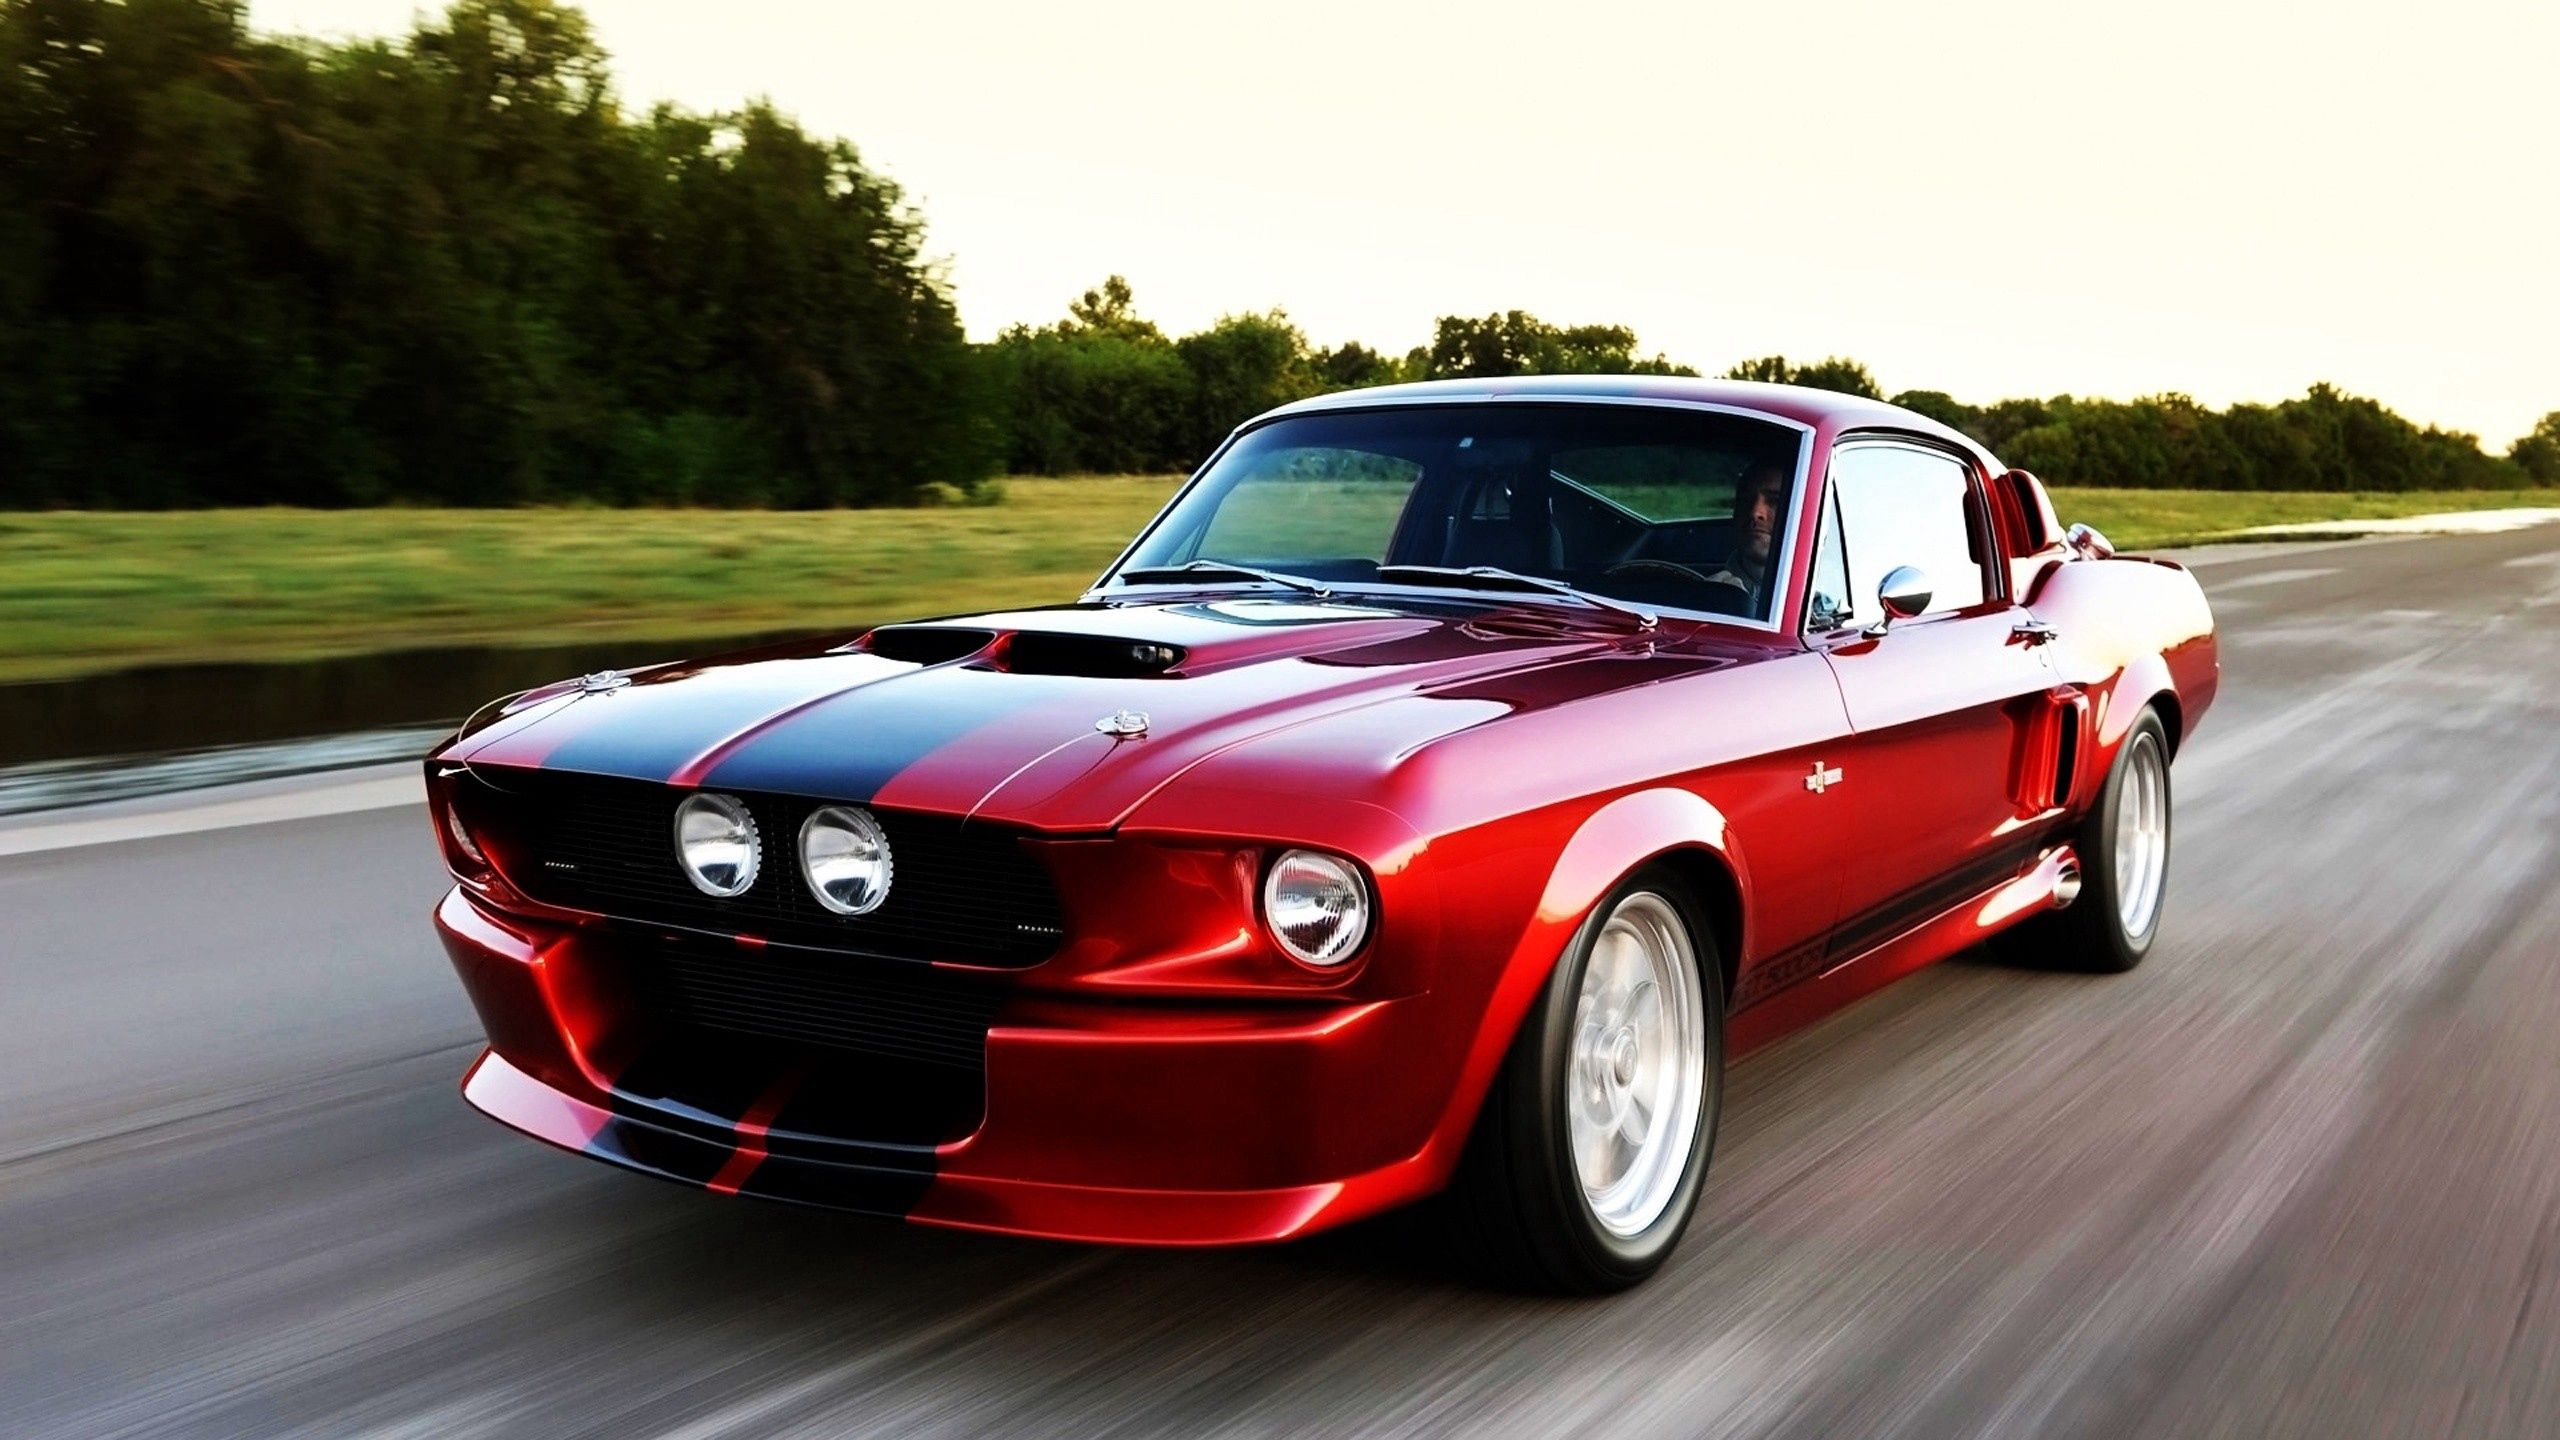 92578 download wallpaper ford, cars, ford mustang, red car screensavers and pictures for free